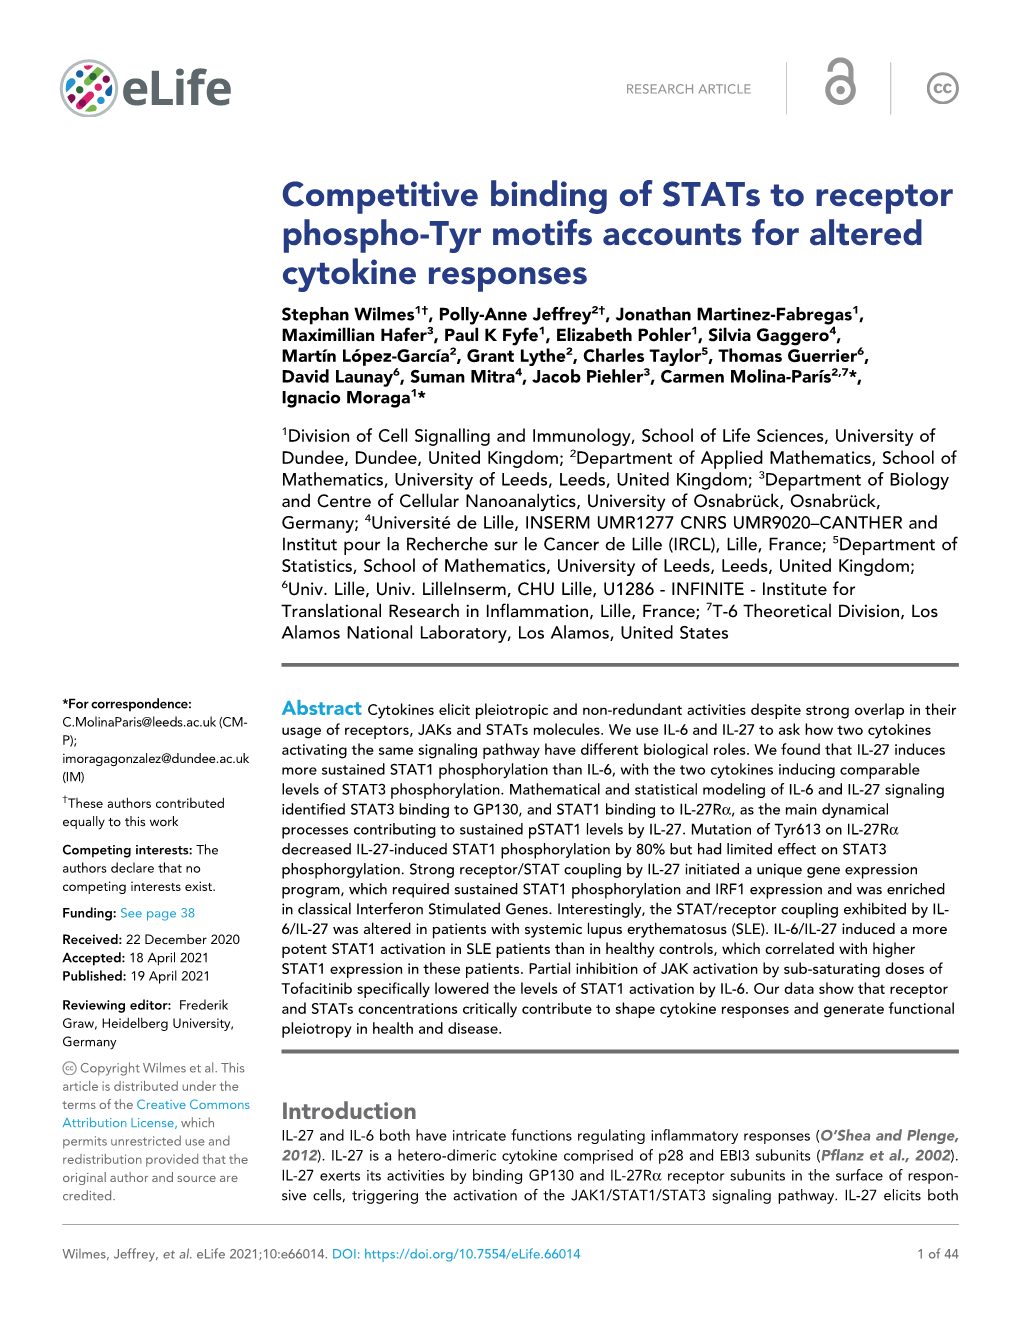 Competitive Binding of Stats to Receptor Phospho-Tyr Motifs